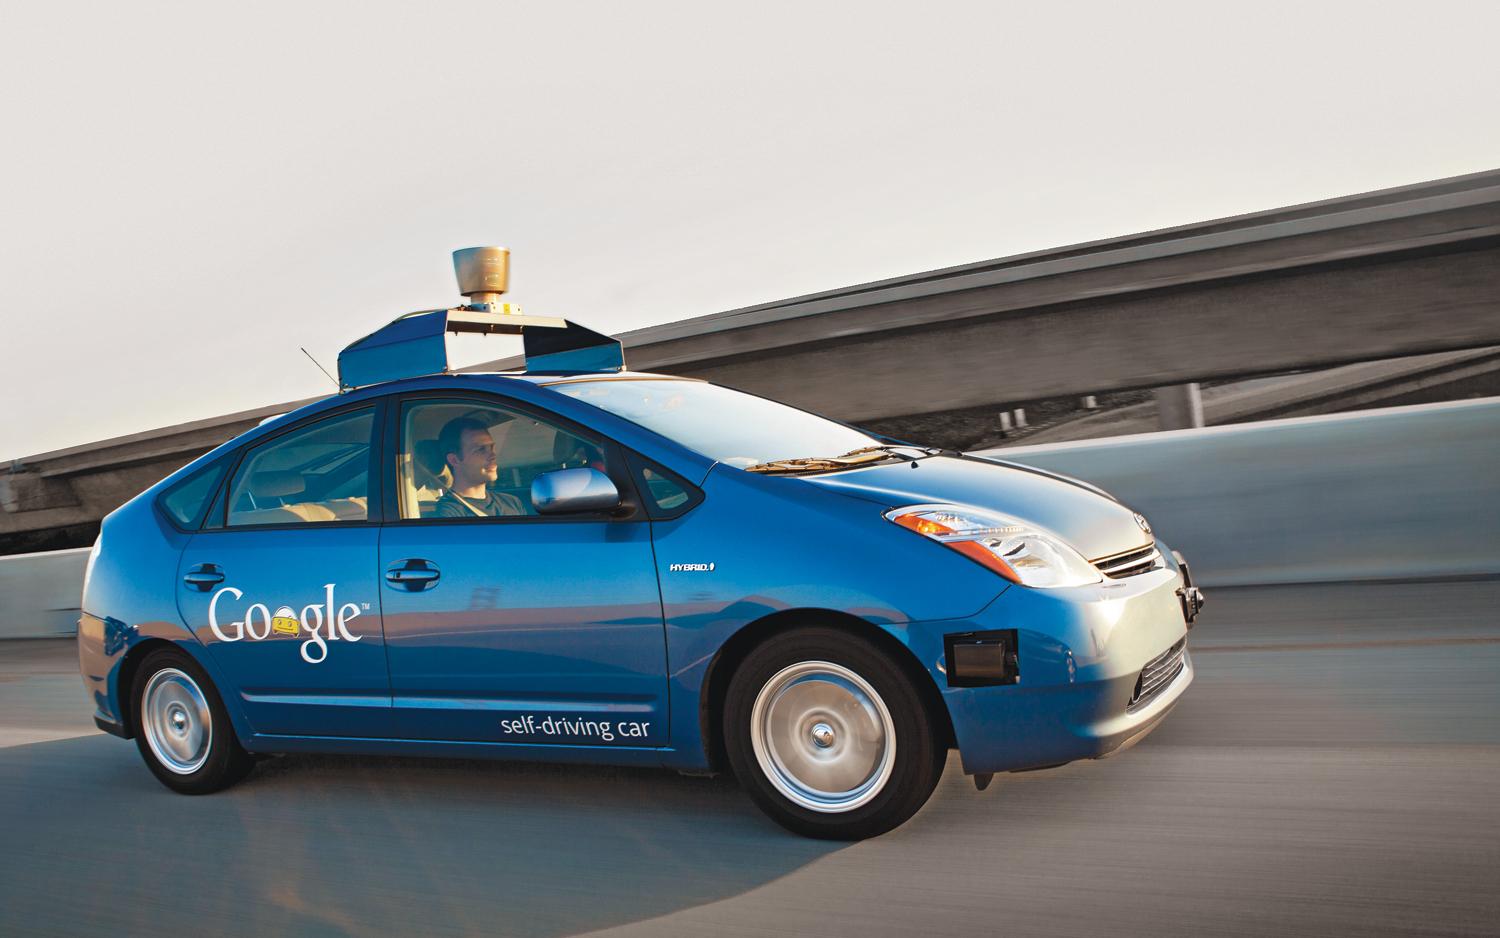 Google self-driving cars prove people are terrible drivers